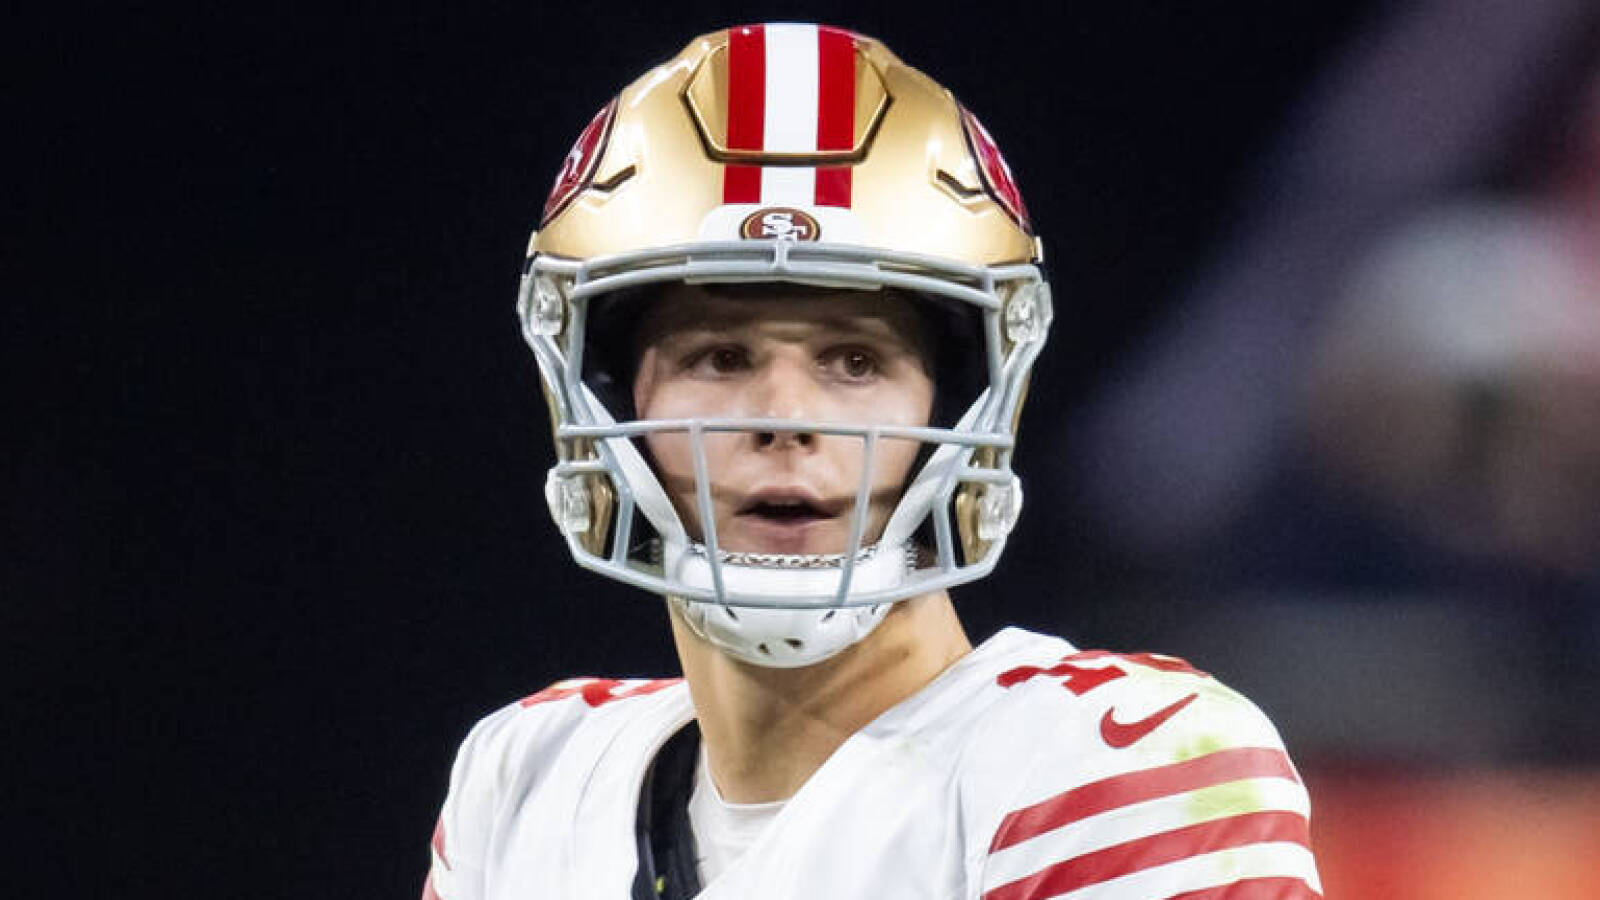 NFL scout makes bold prediction about 49ers QB Brock Purdy